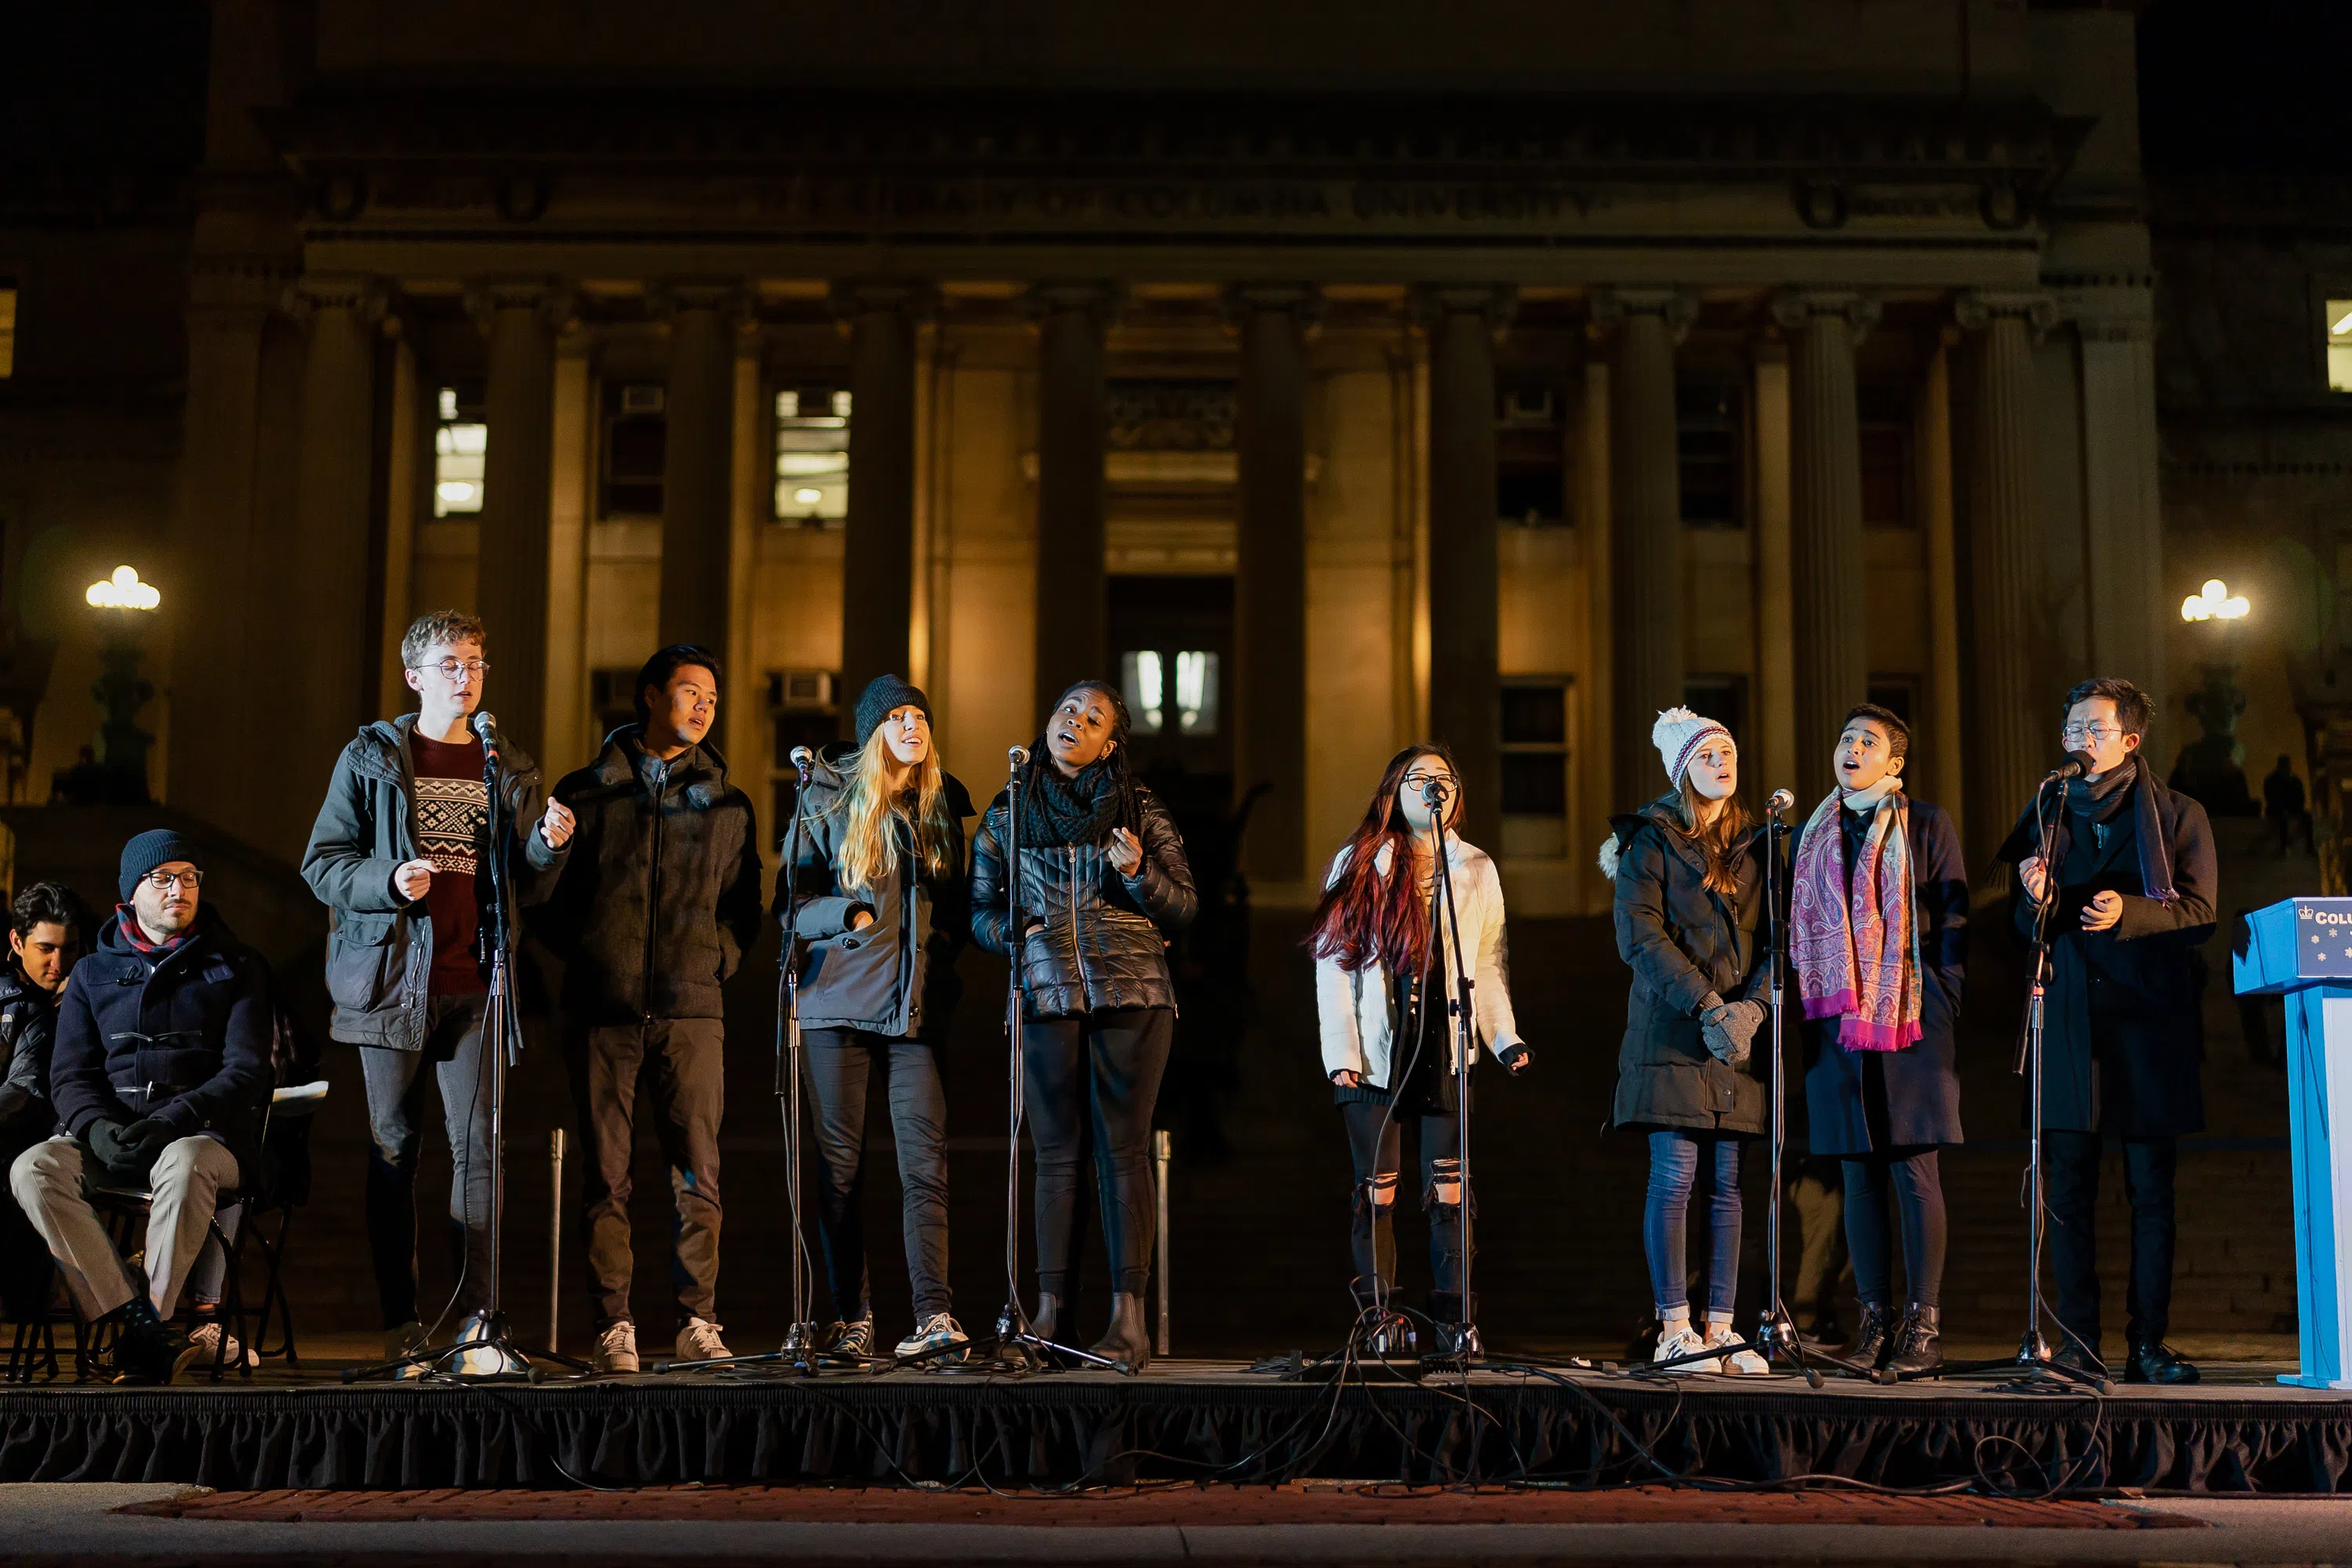 An a capella group stands on stage and sings, they are wearing winter clothes.